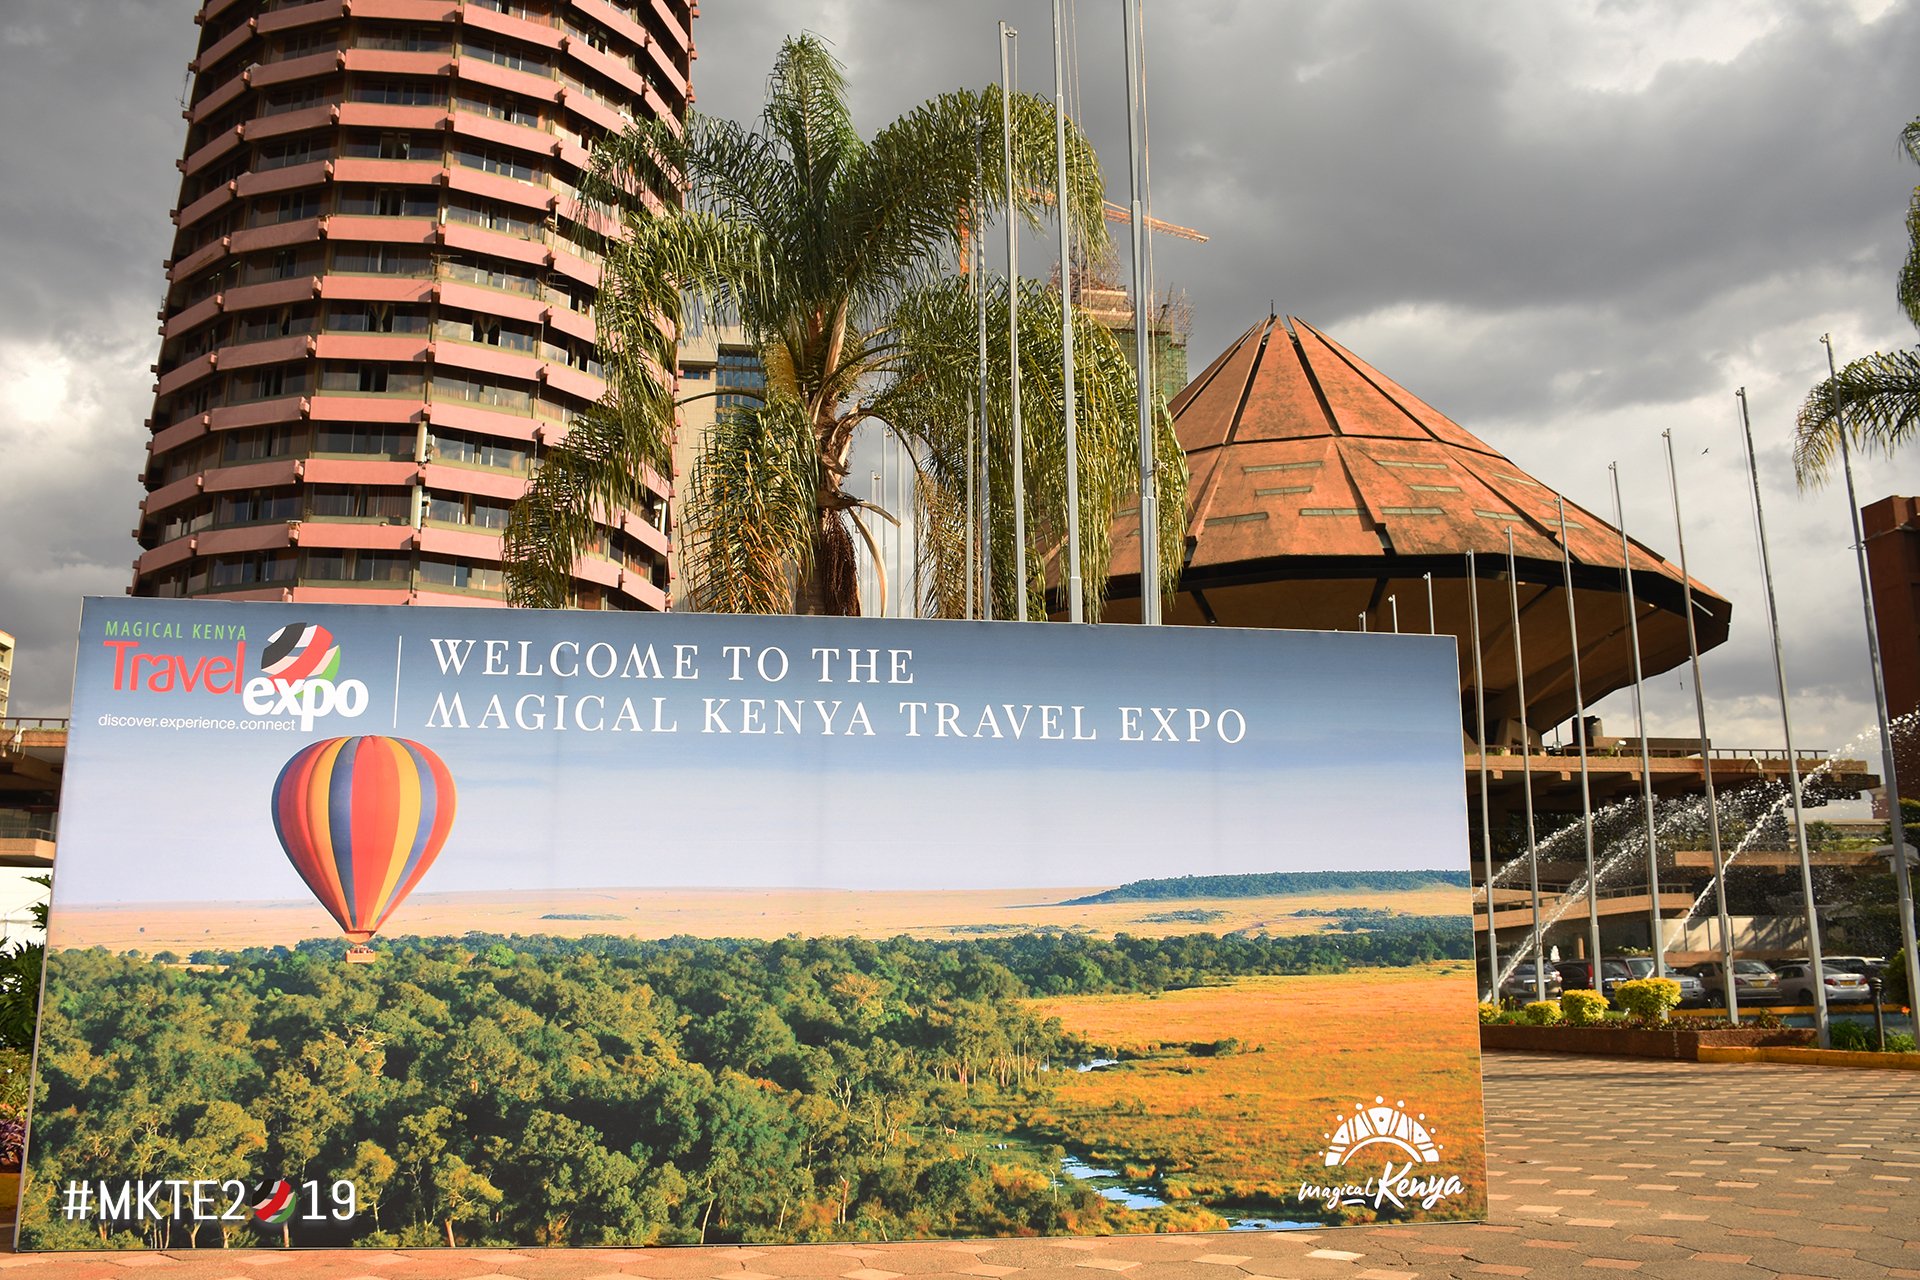 Showcasing the exterior of MKTE 2019